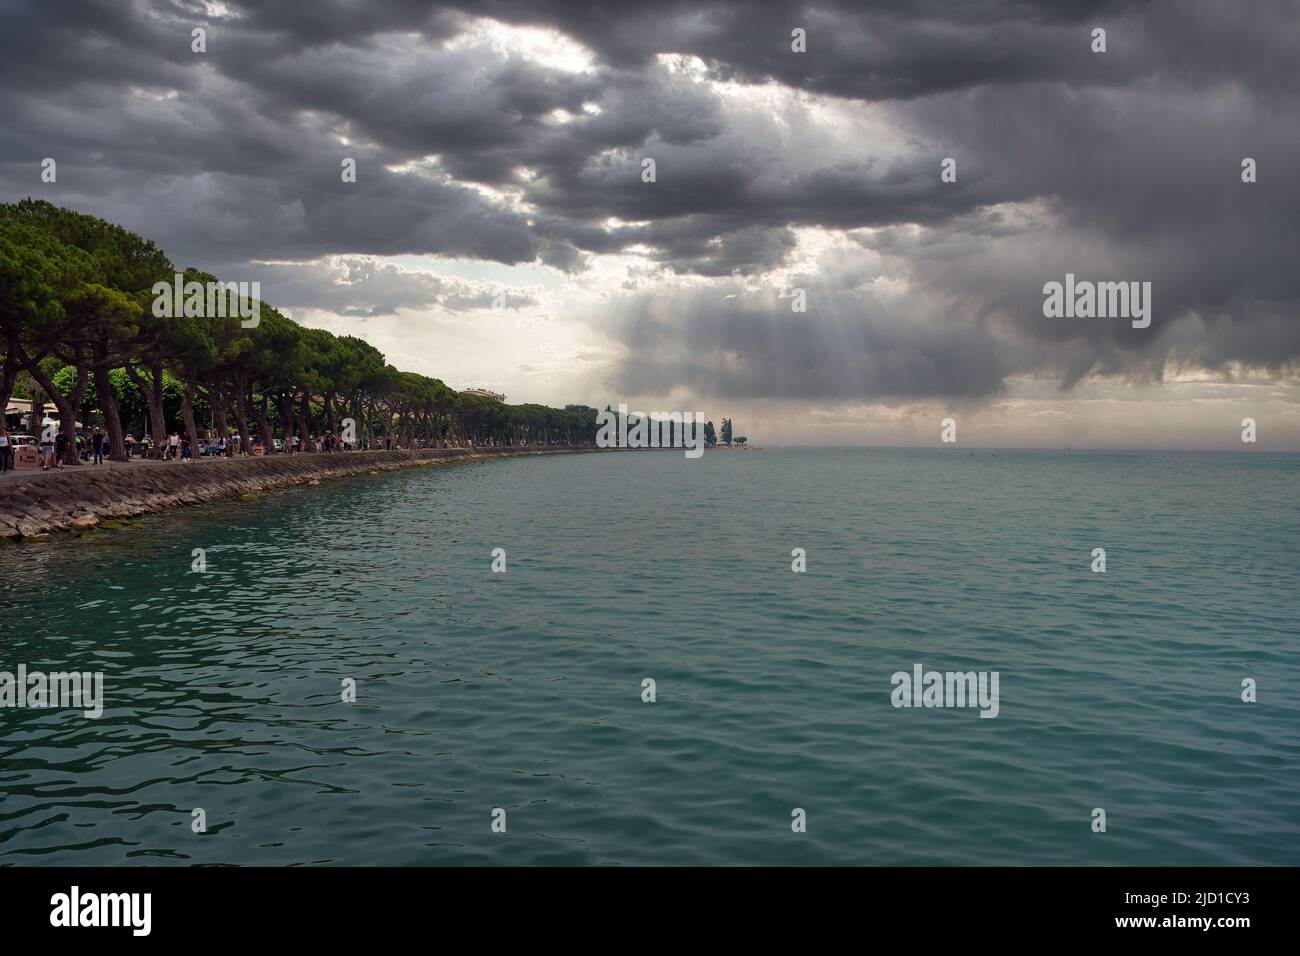 The canal in Peschiera del Garda, Italy on sunny day of May, 05, 2022. Stock Photo